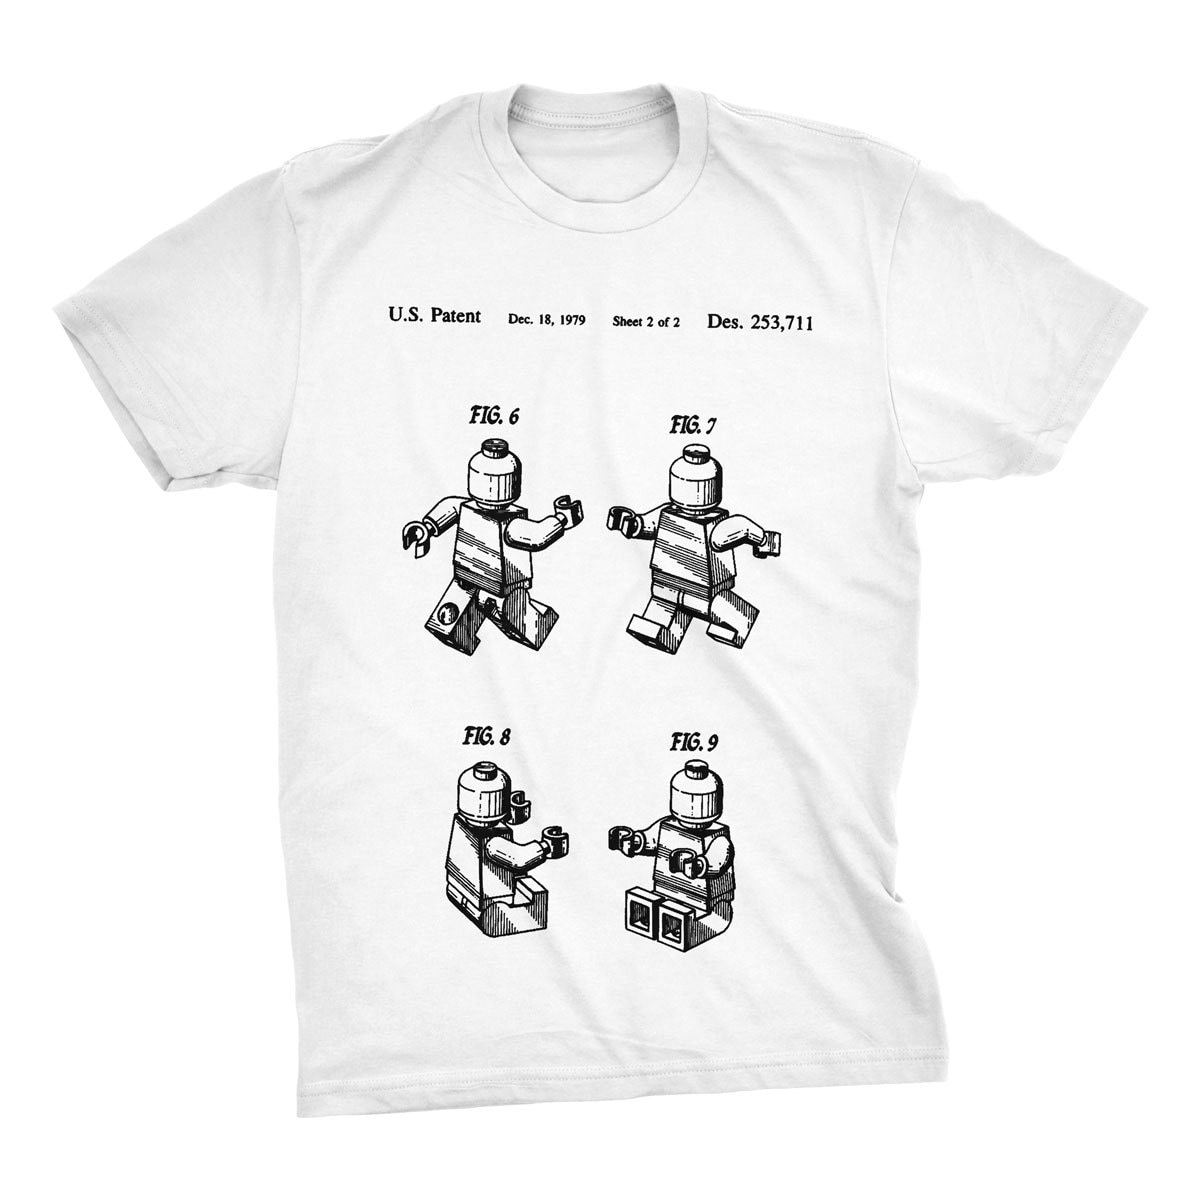 Patent. - Soft Blueprint. Red, Gray. Ringspun Lego Man S-3X. T-shirt. Sizes Tee in Black, Patent White, Etsy Cotton Lego Lego Available or